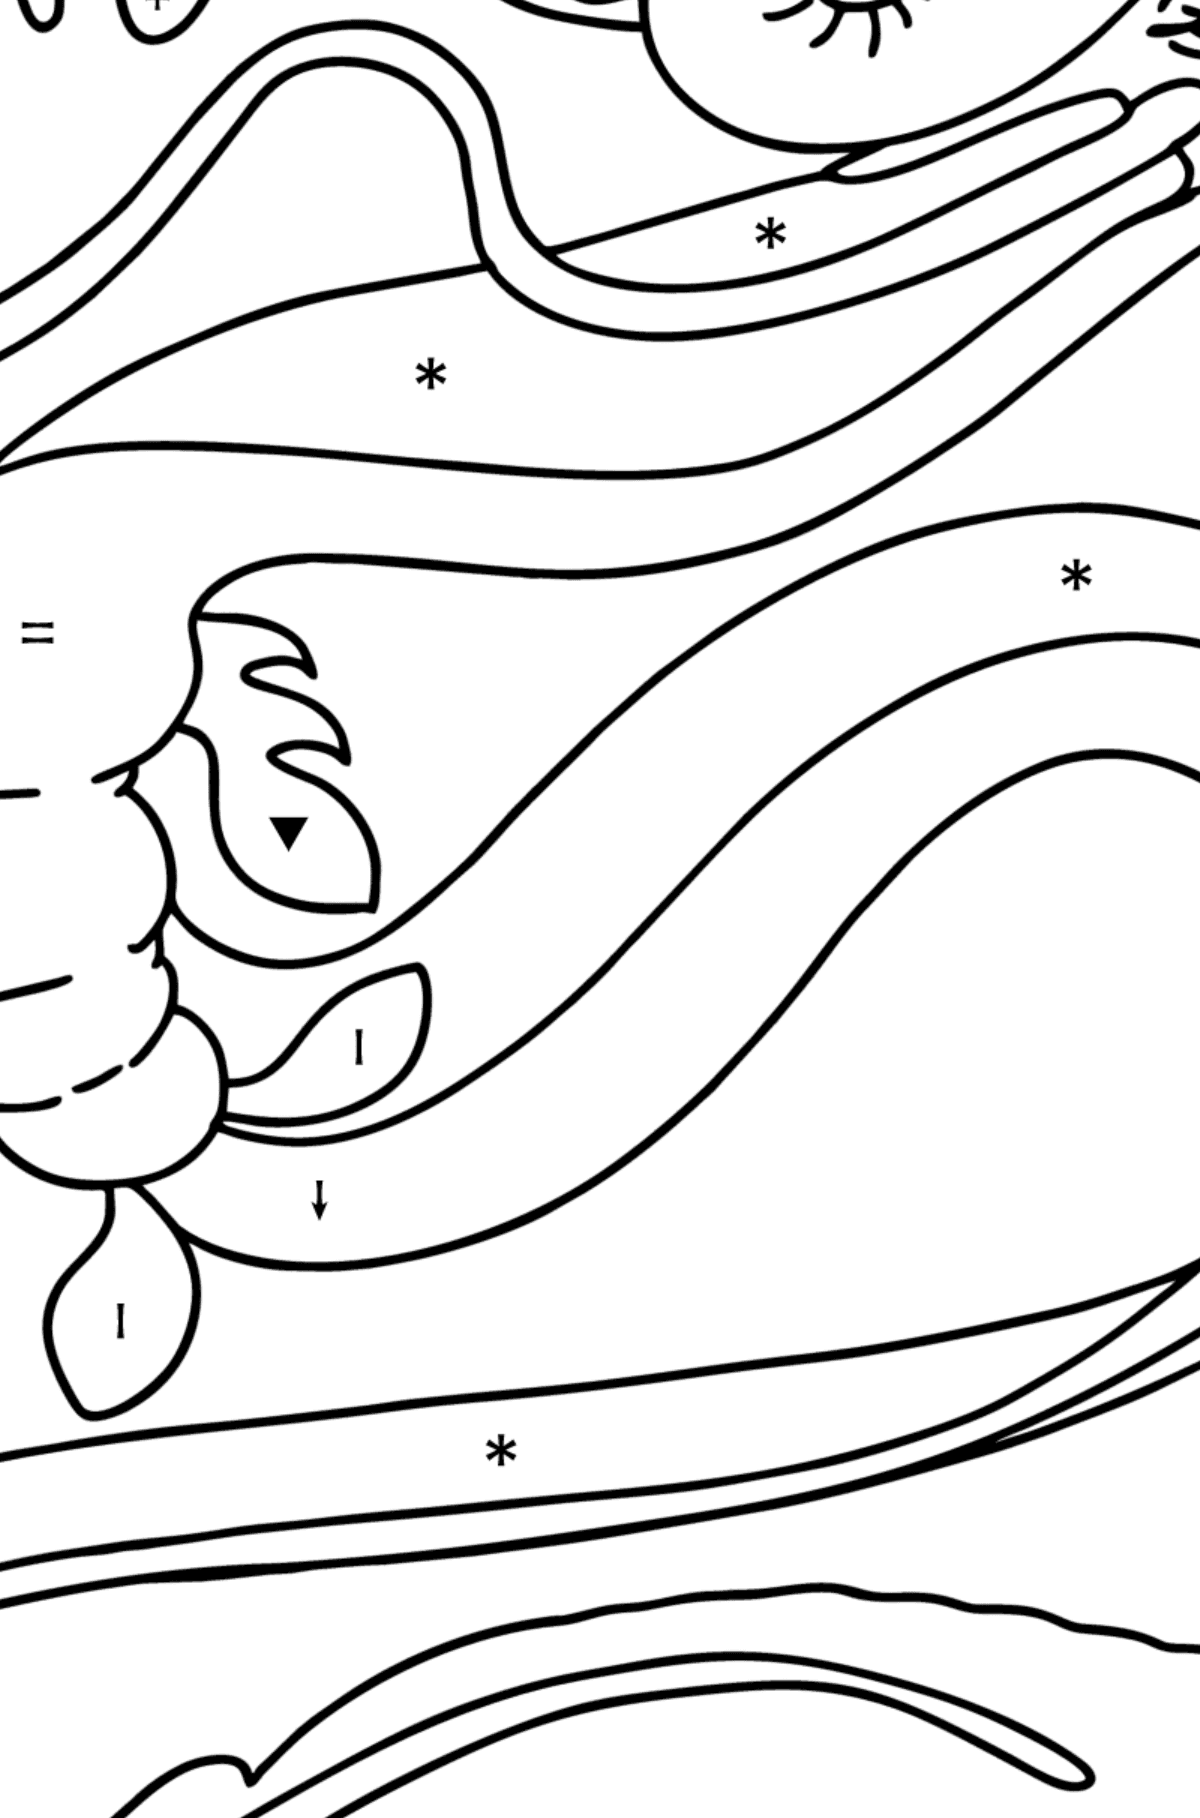 Snake Dragon coloring page - Coloring by Symbols for Kids